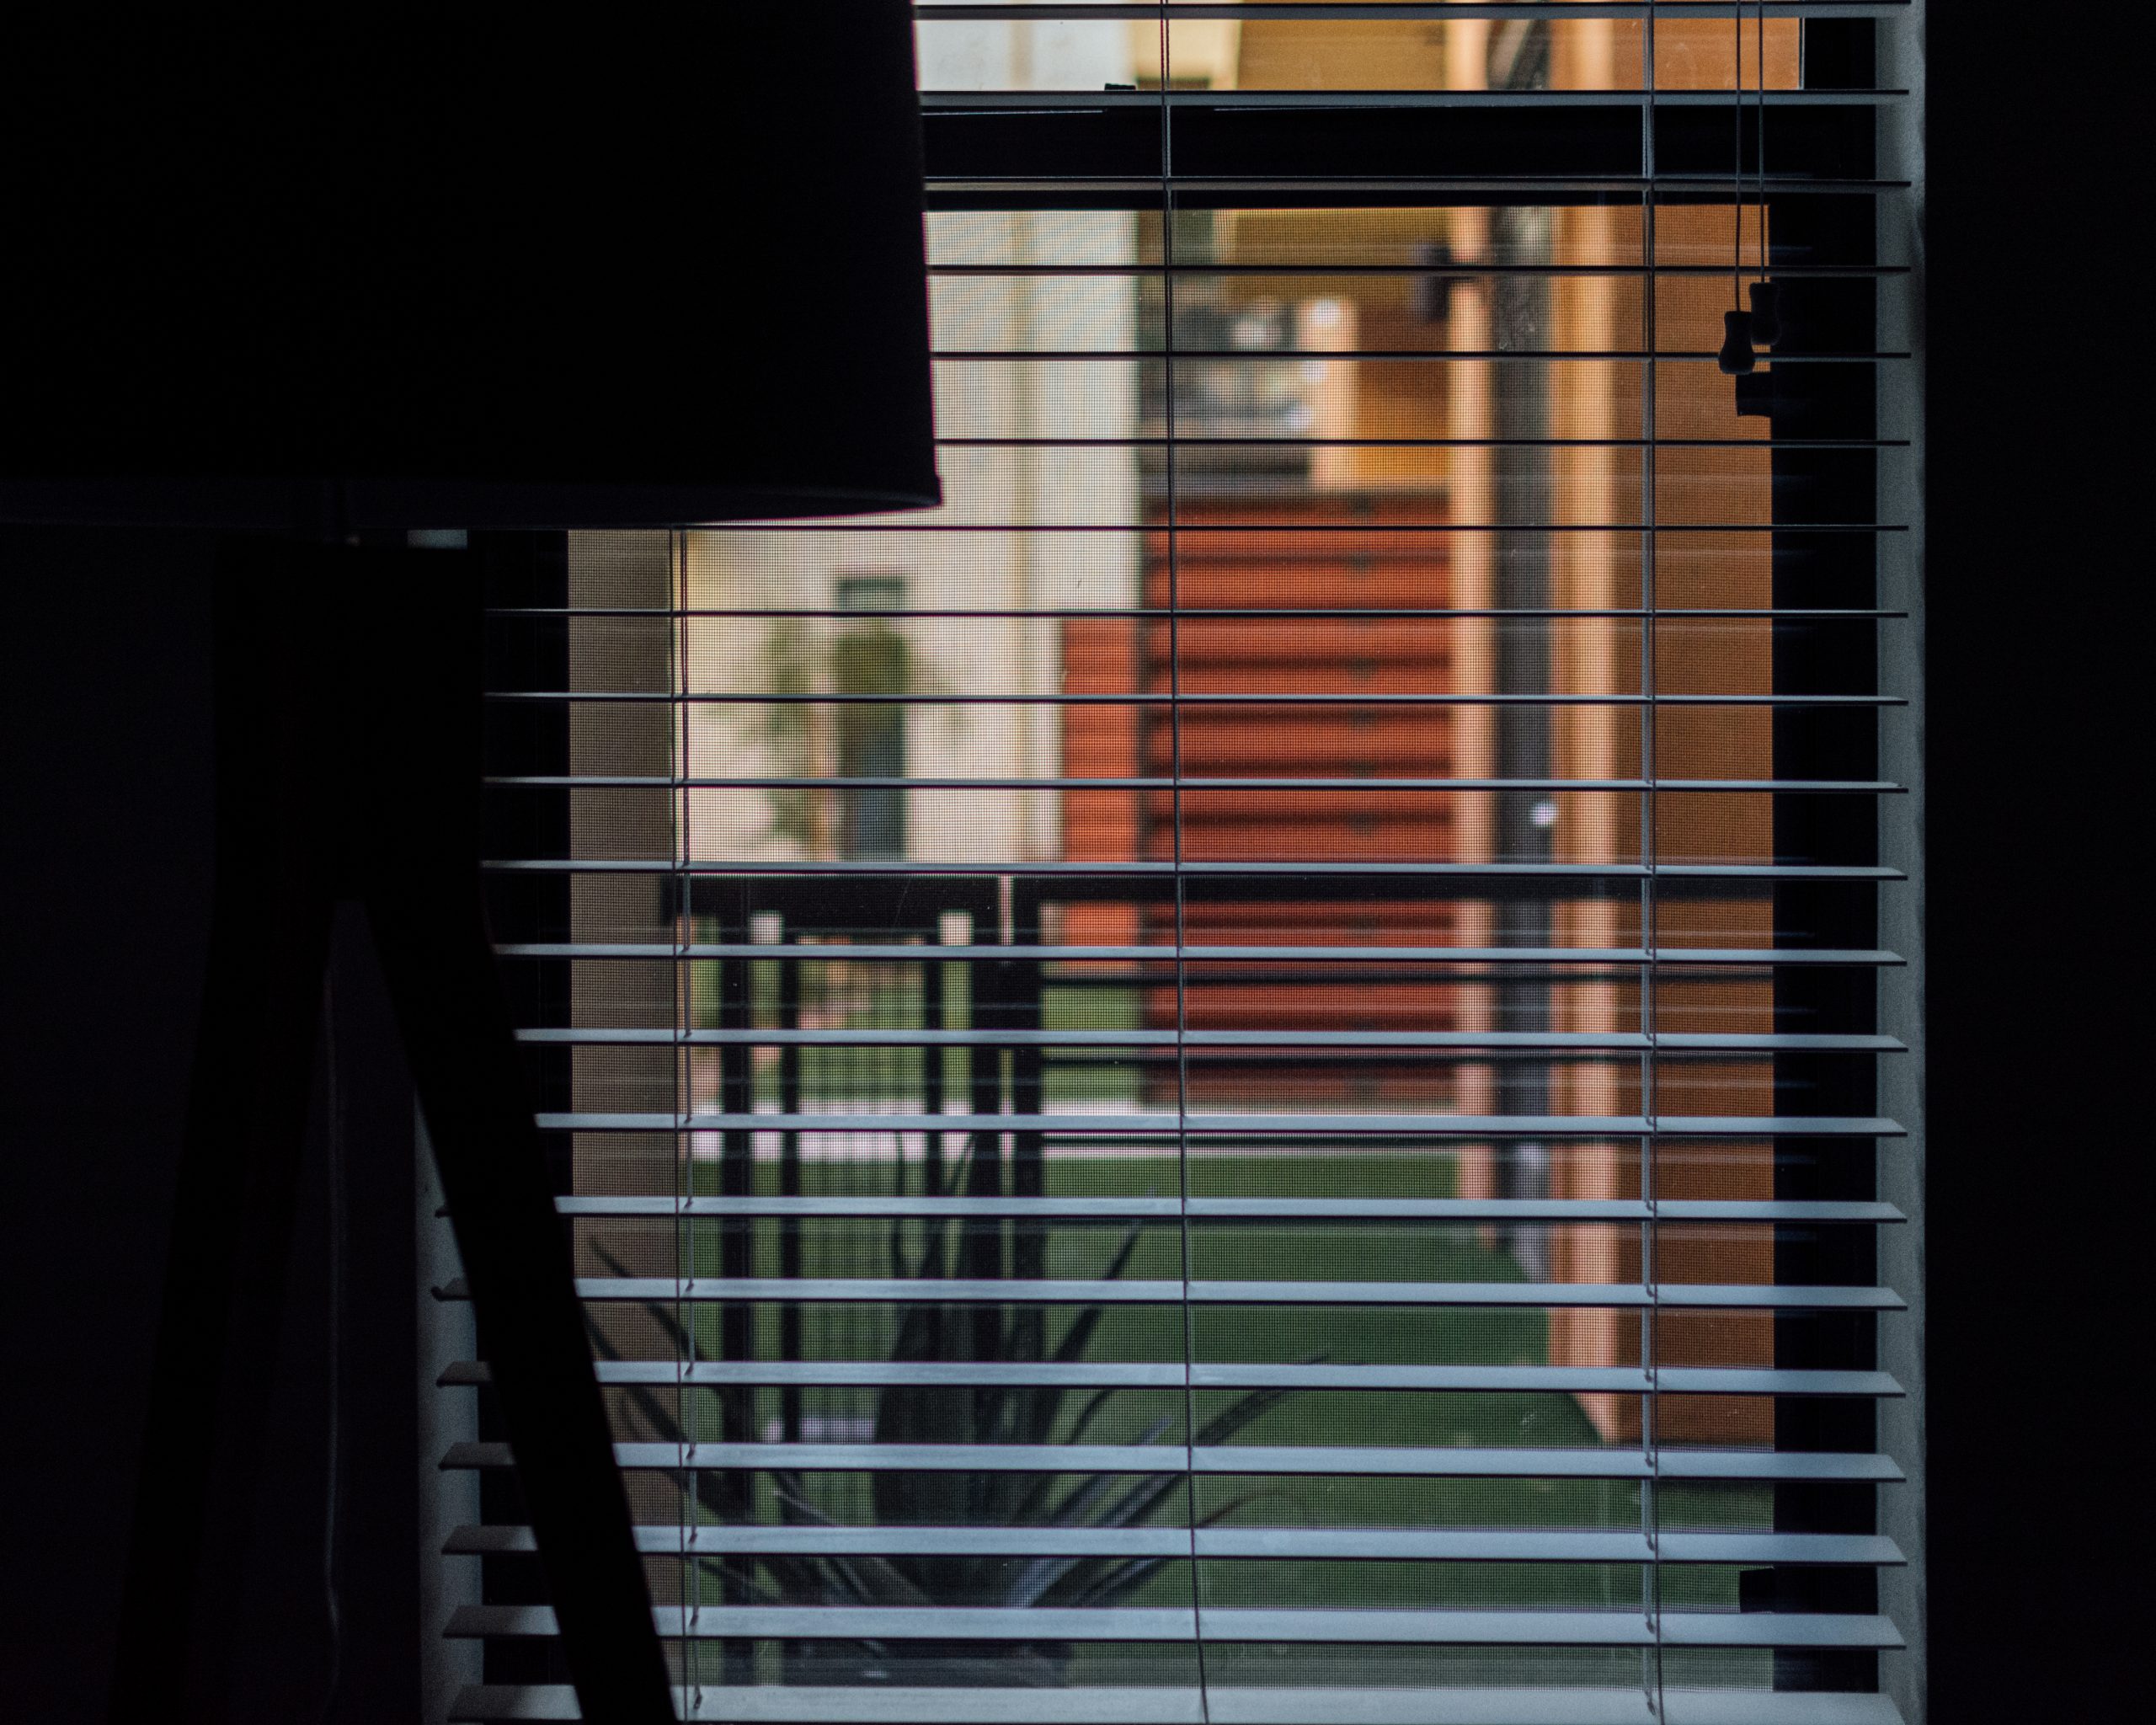 Photo of silhouette of a lamp shade looking into a courtyard.